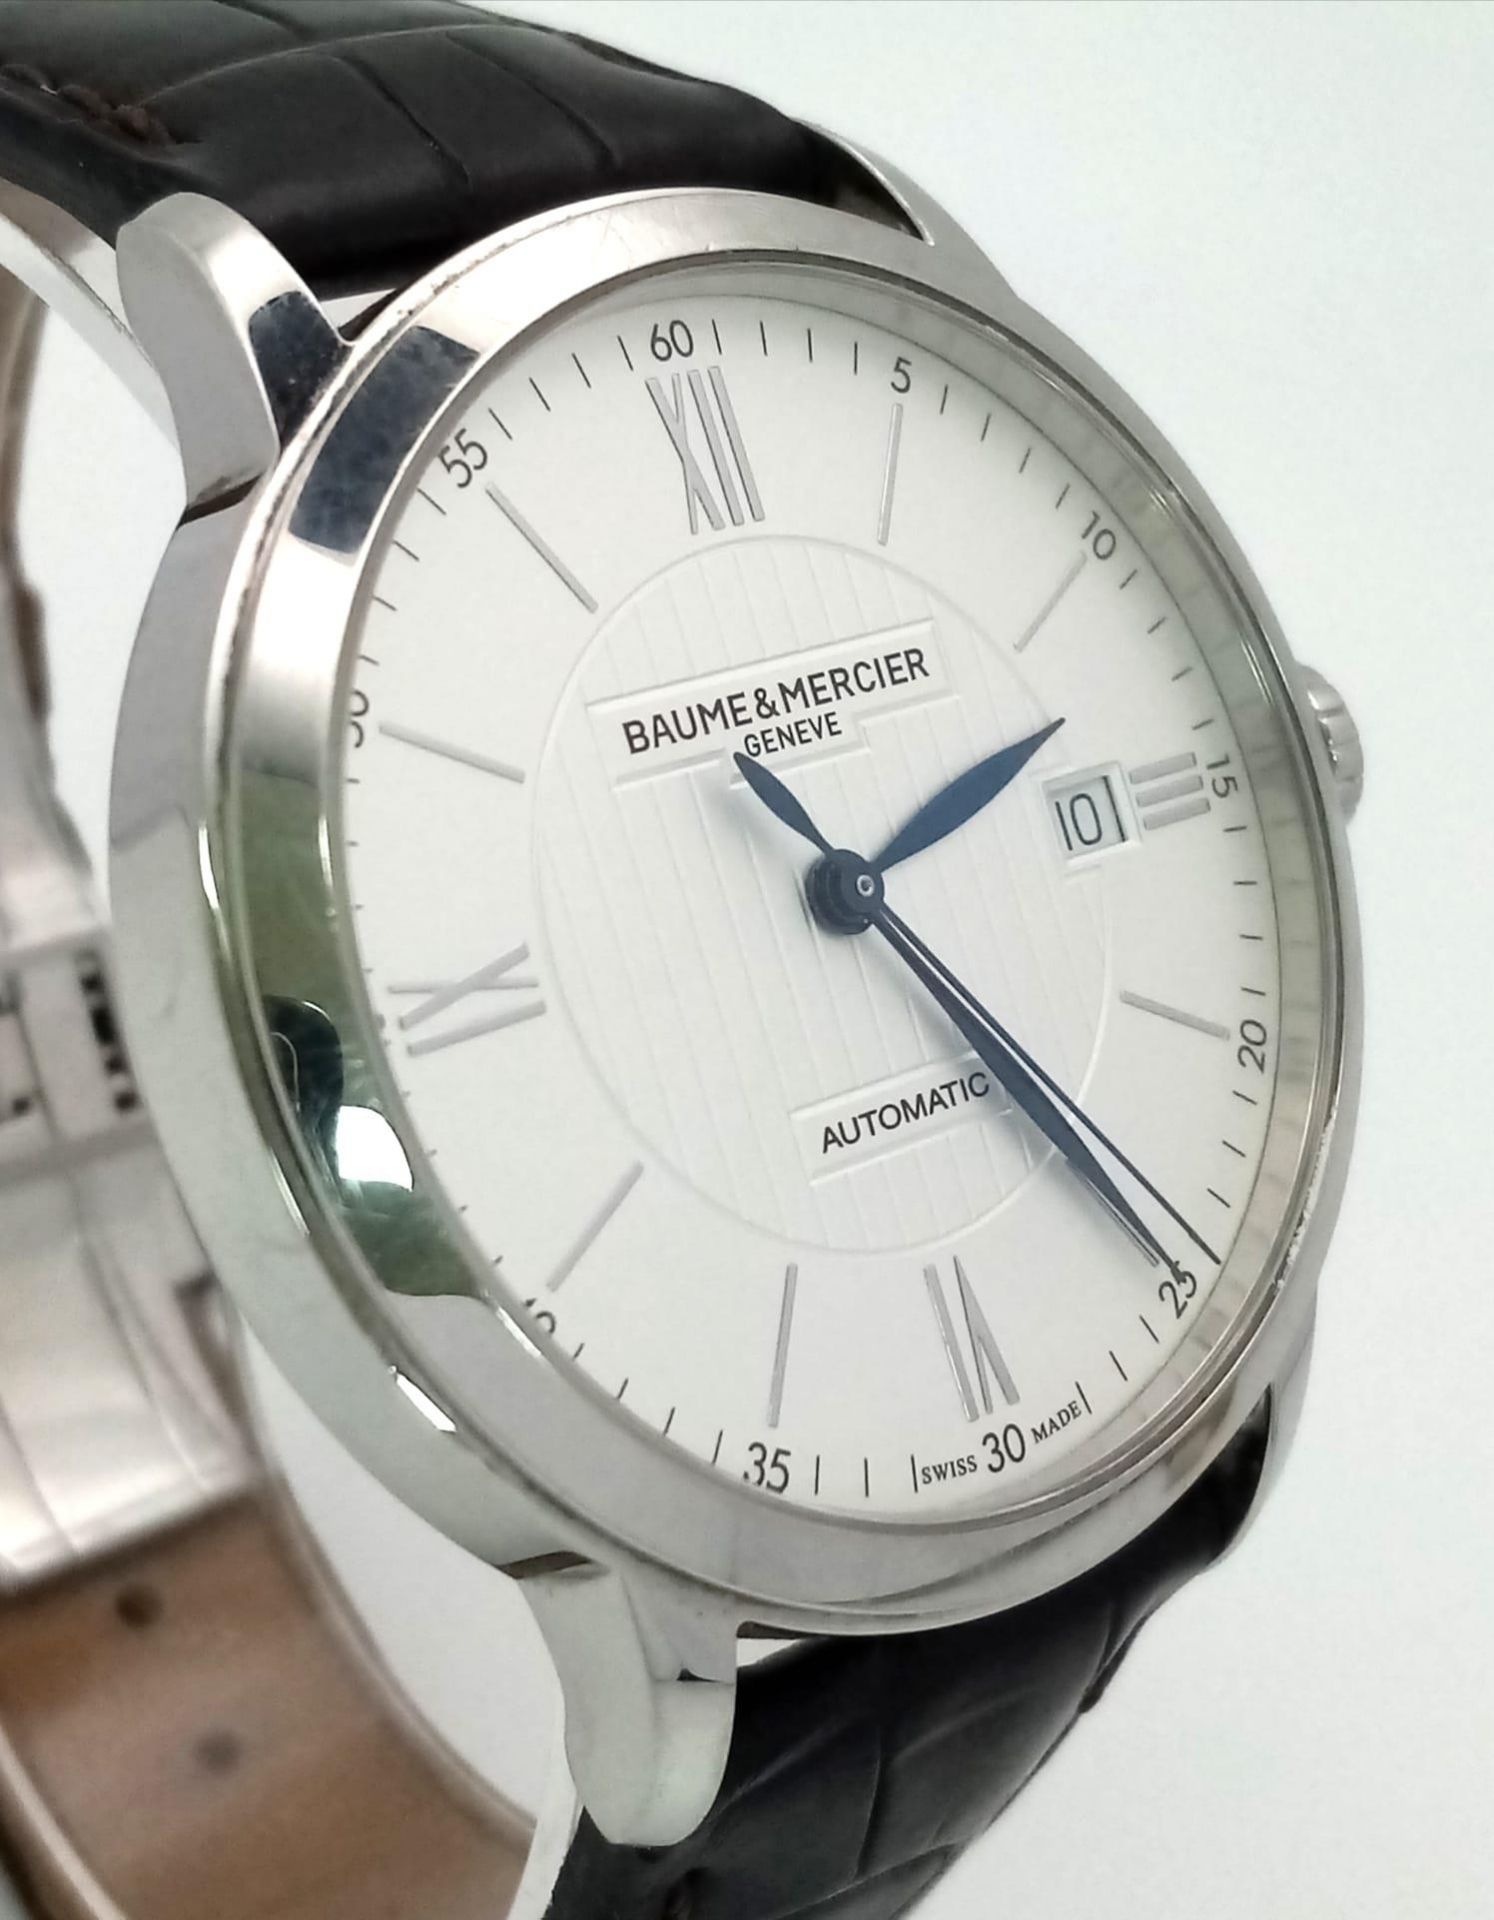 A Baume and Mercier Automatic Gents Watch. Original leather strap. Stainless steel case with - Image 3 of 8